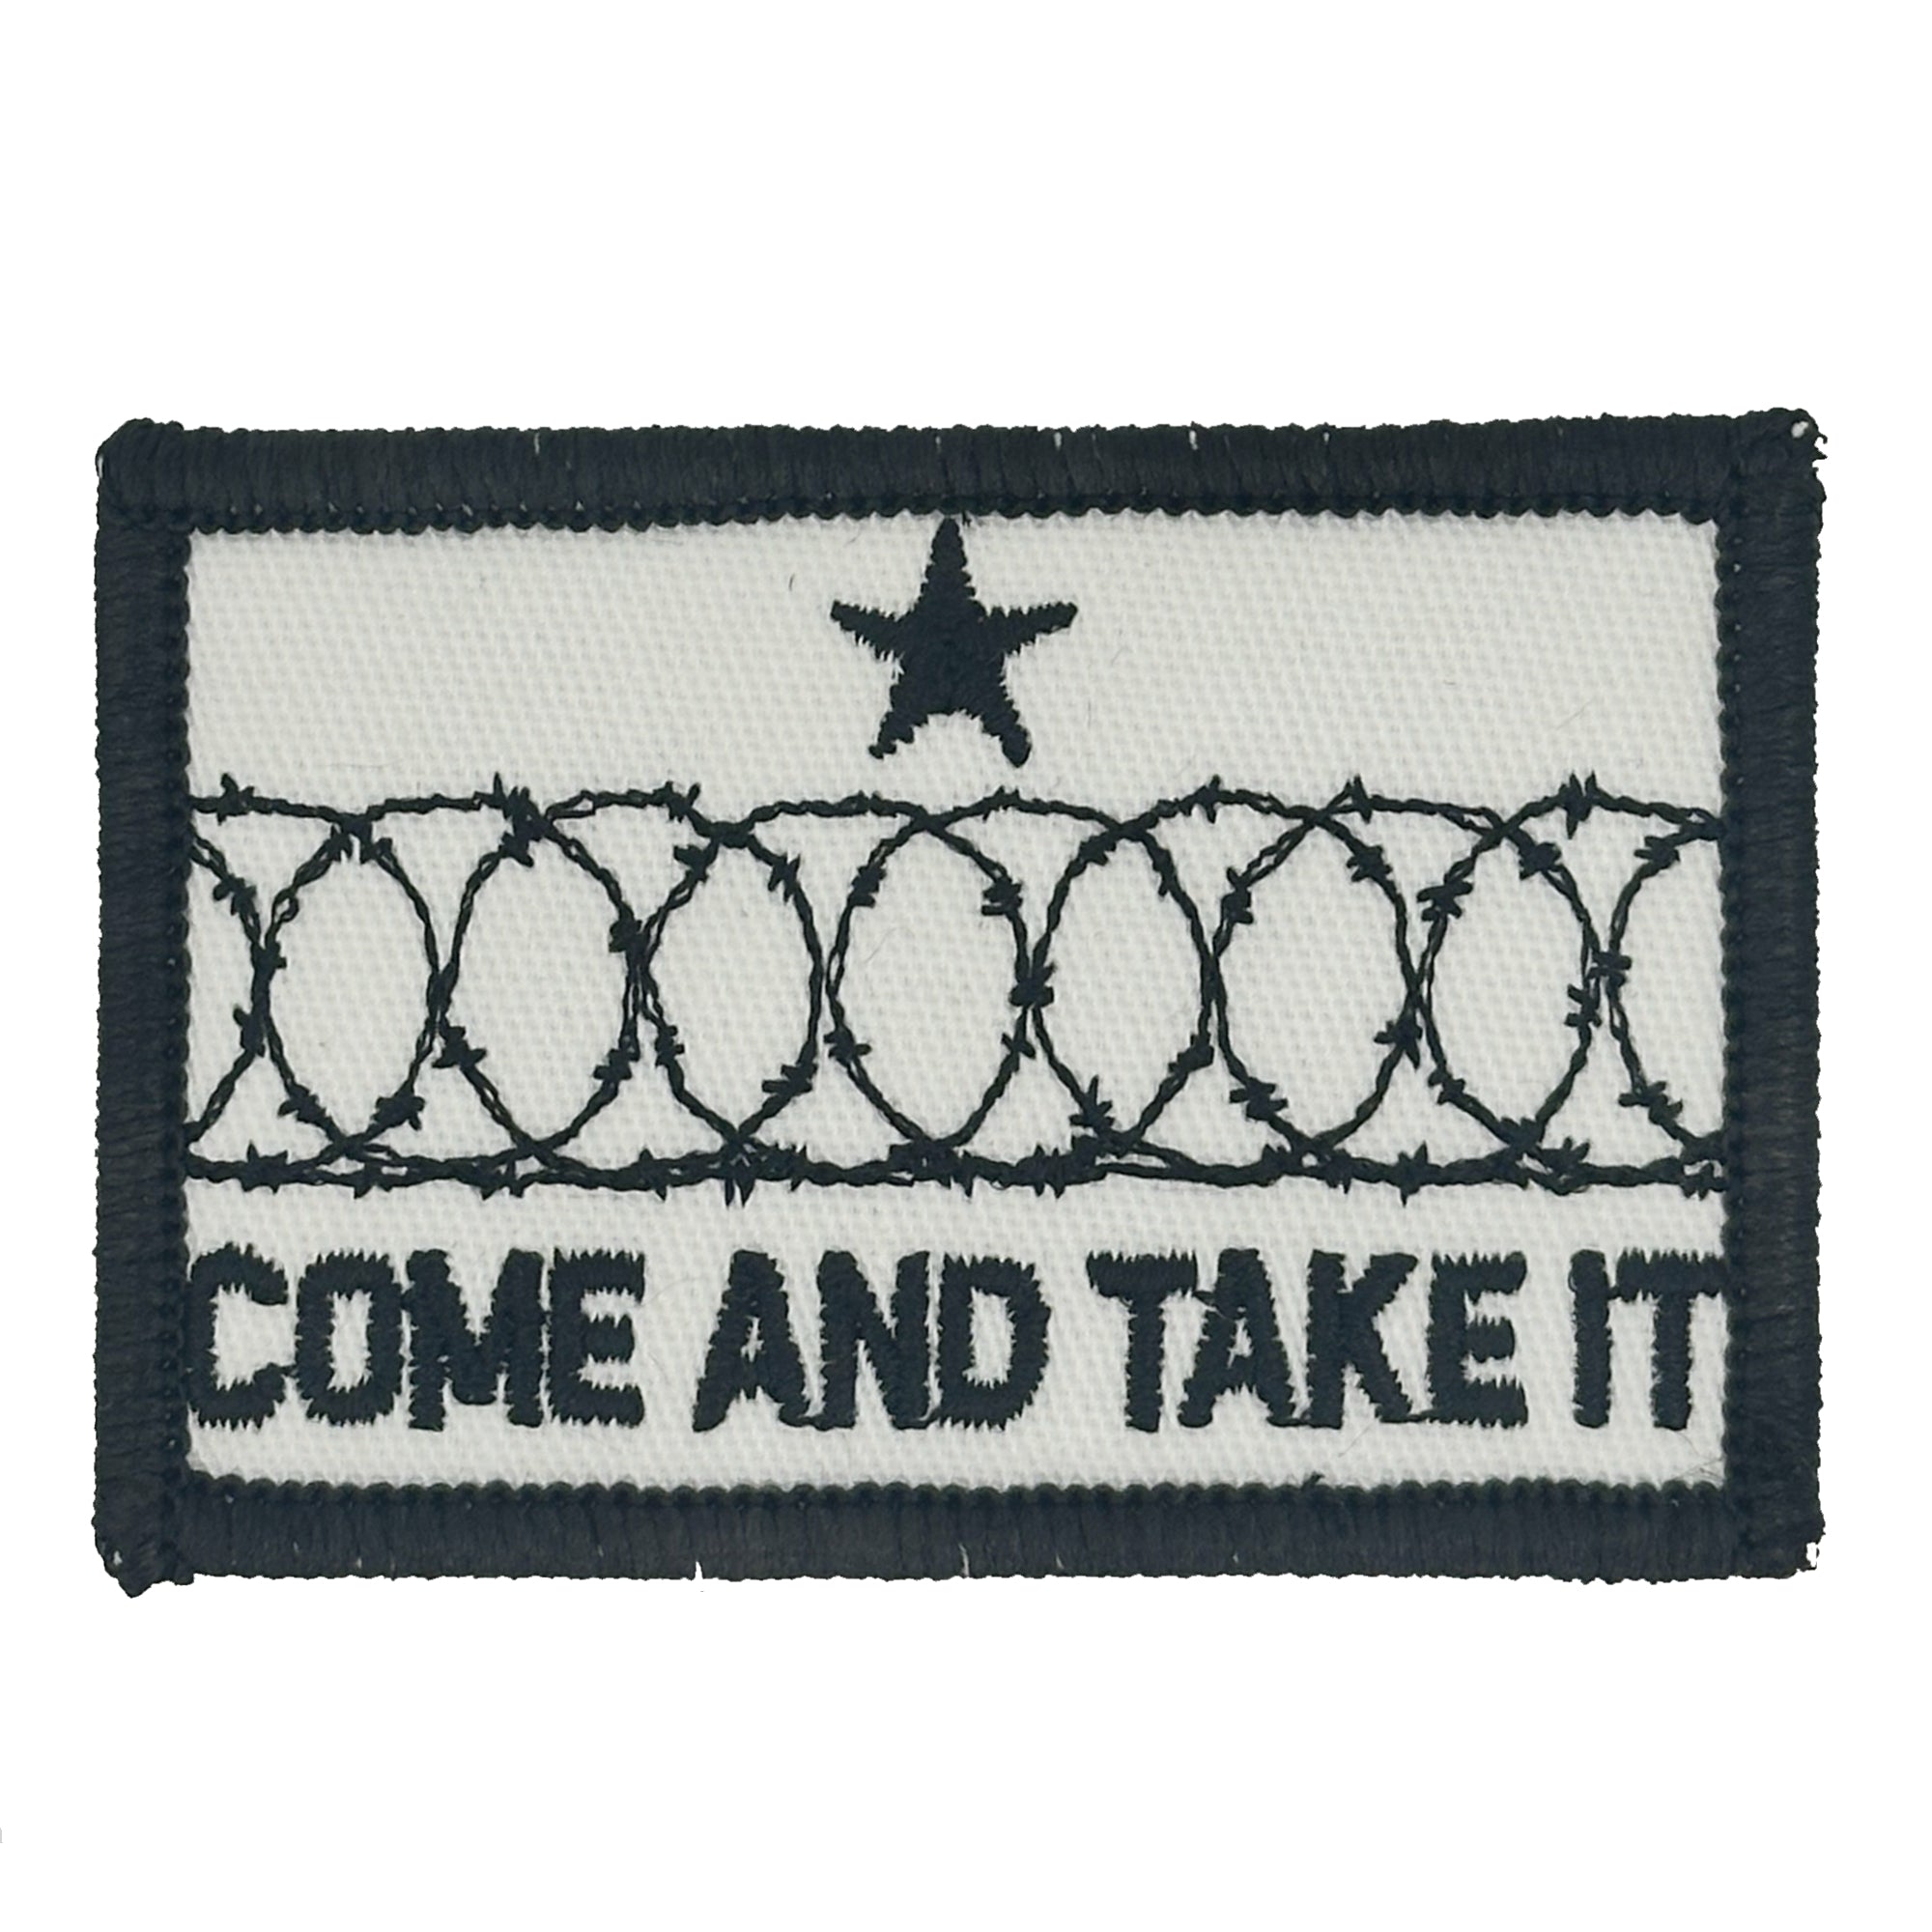 Come And Take It Texas Border Wall Barbed Wire - 2x3 Patch